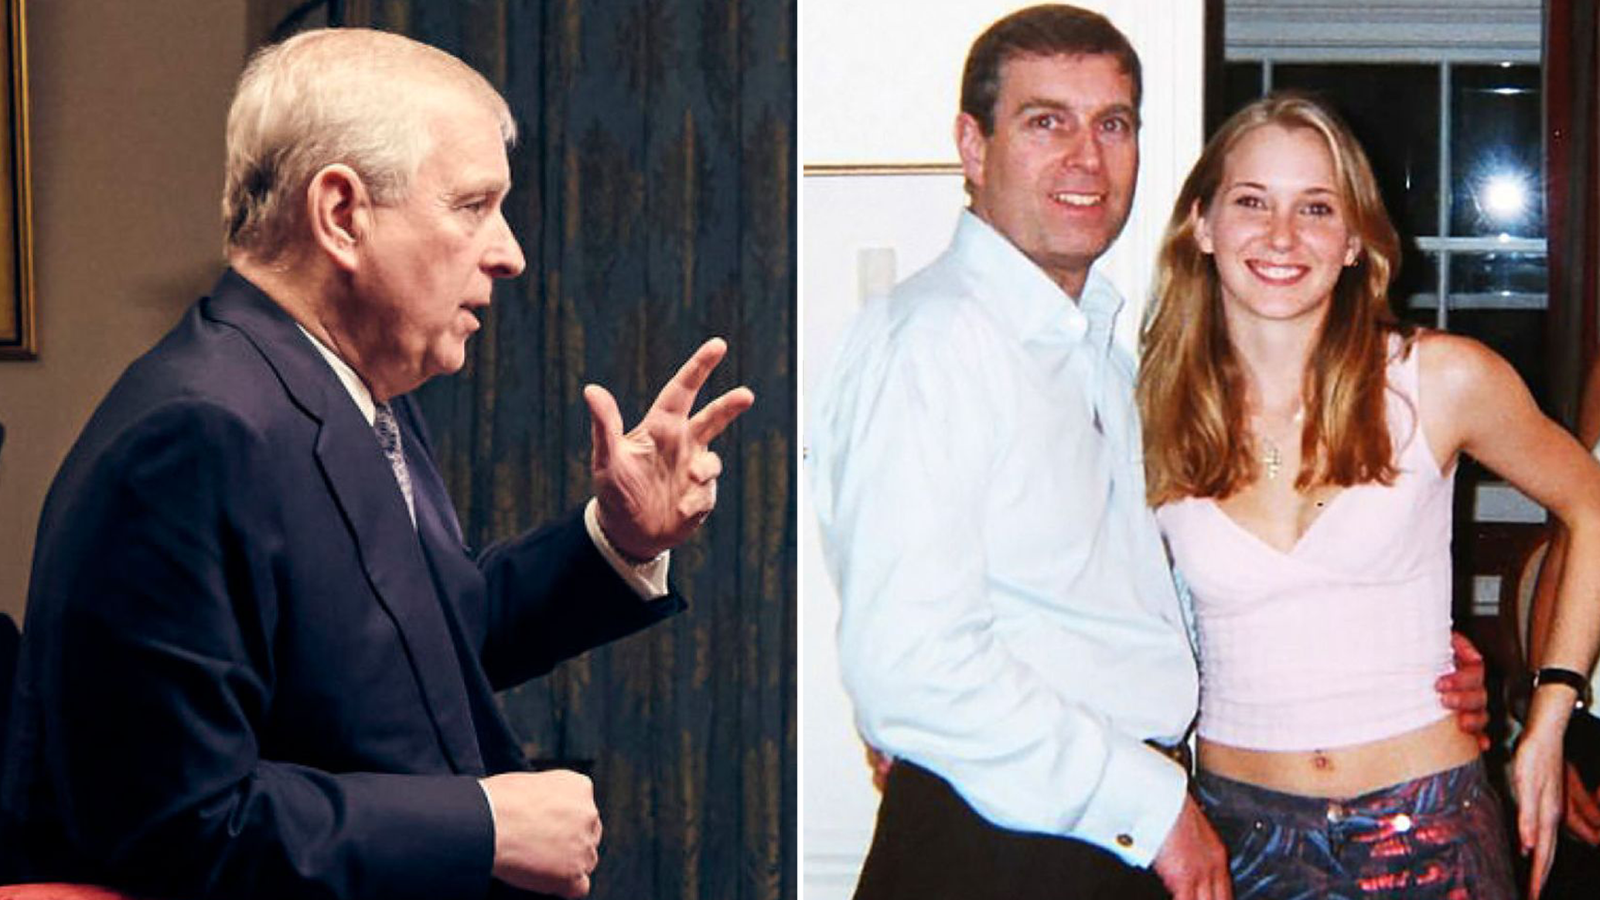 Prince Andrew says he was 'too honourable' in his relationship with